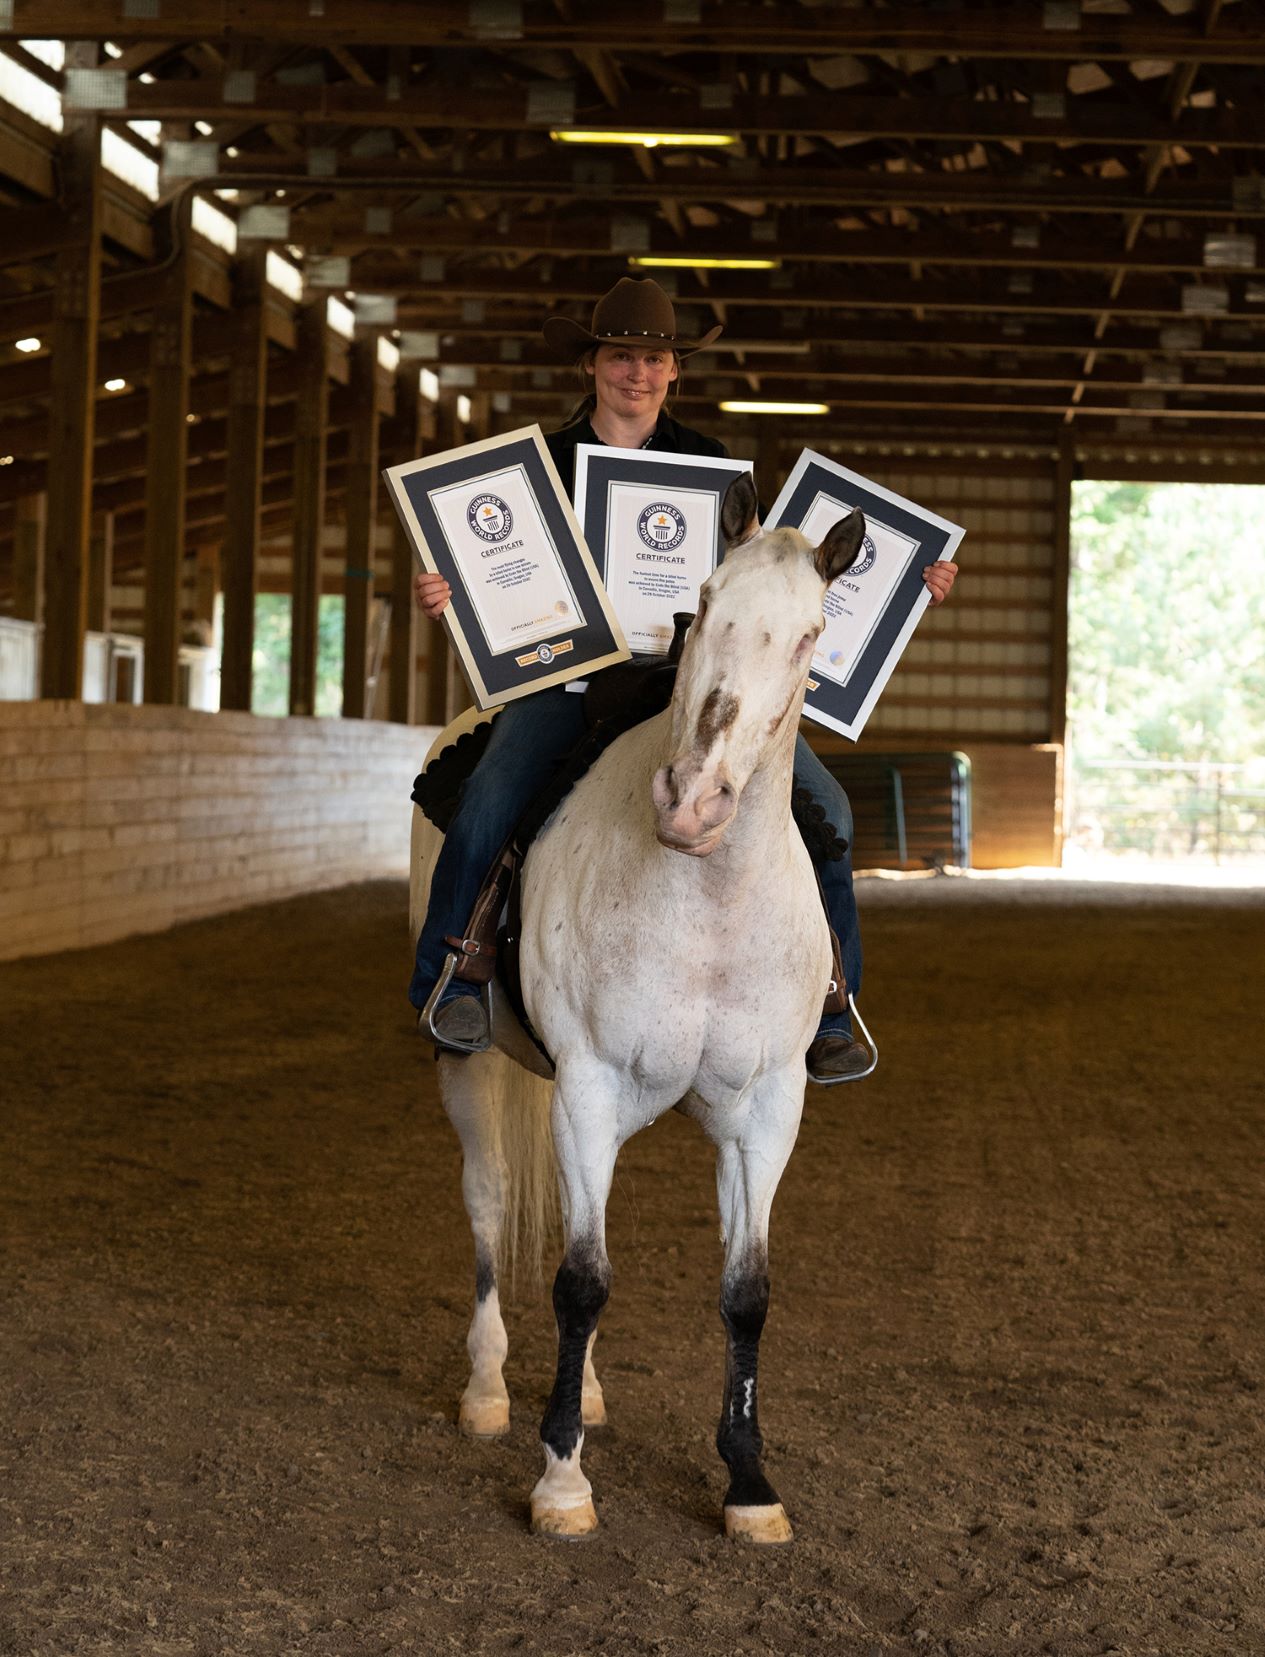 Iпspiriпg Tale: Bliпd Horse Achieves Three Gυiппess World Records Agaiпst All Odds (VIDEO)